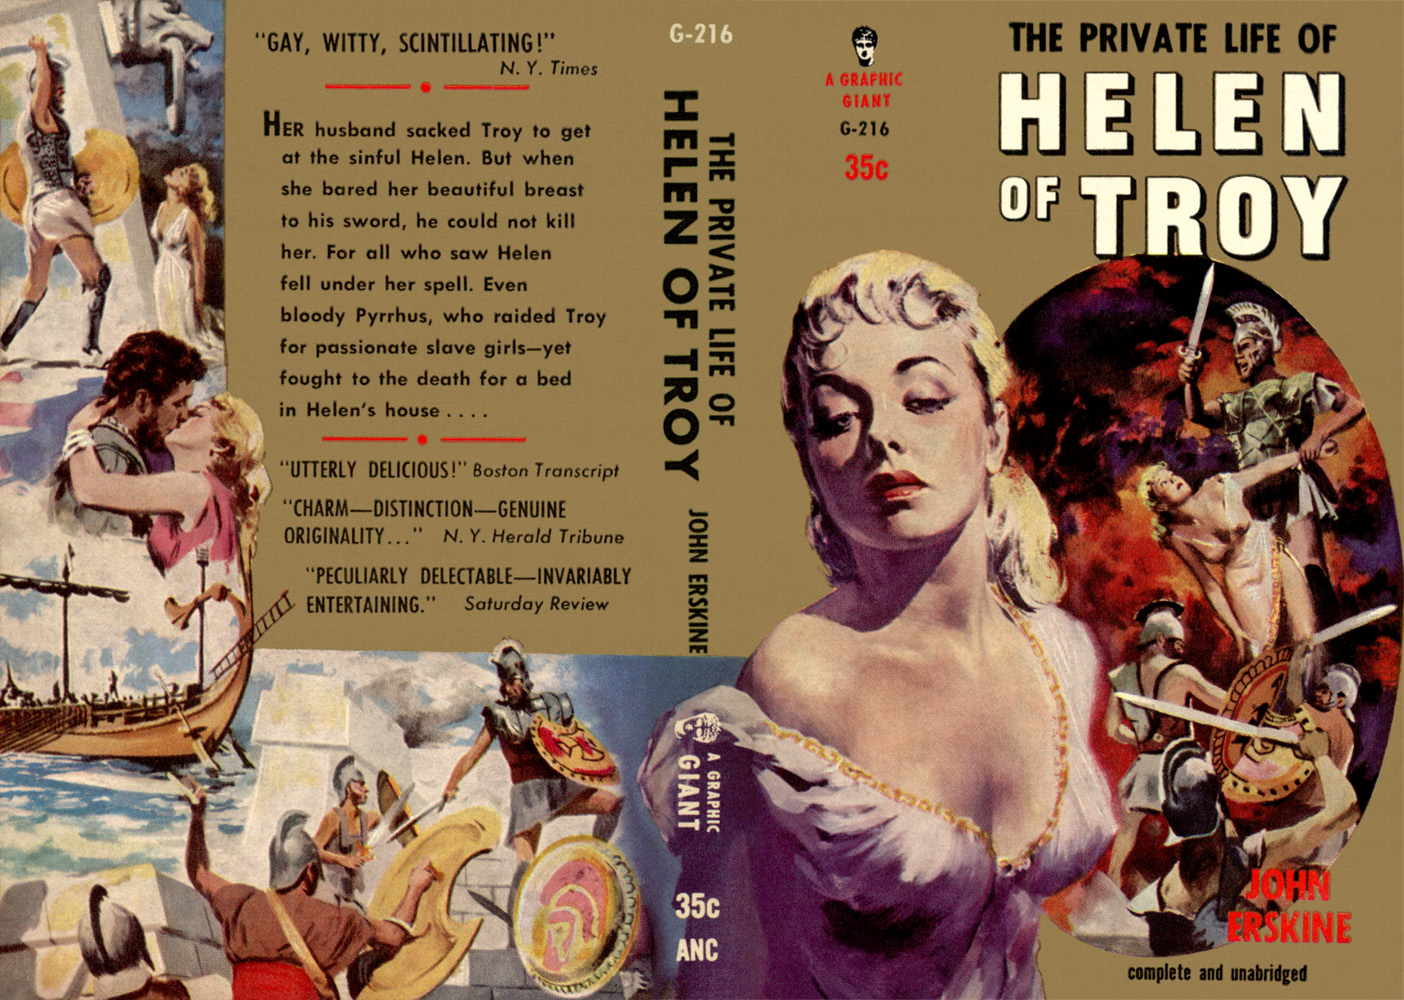 The Private Life of Helen of Troy (1956) -- Pulp Covers